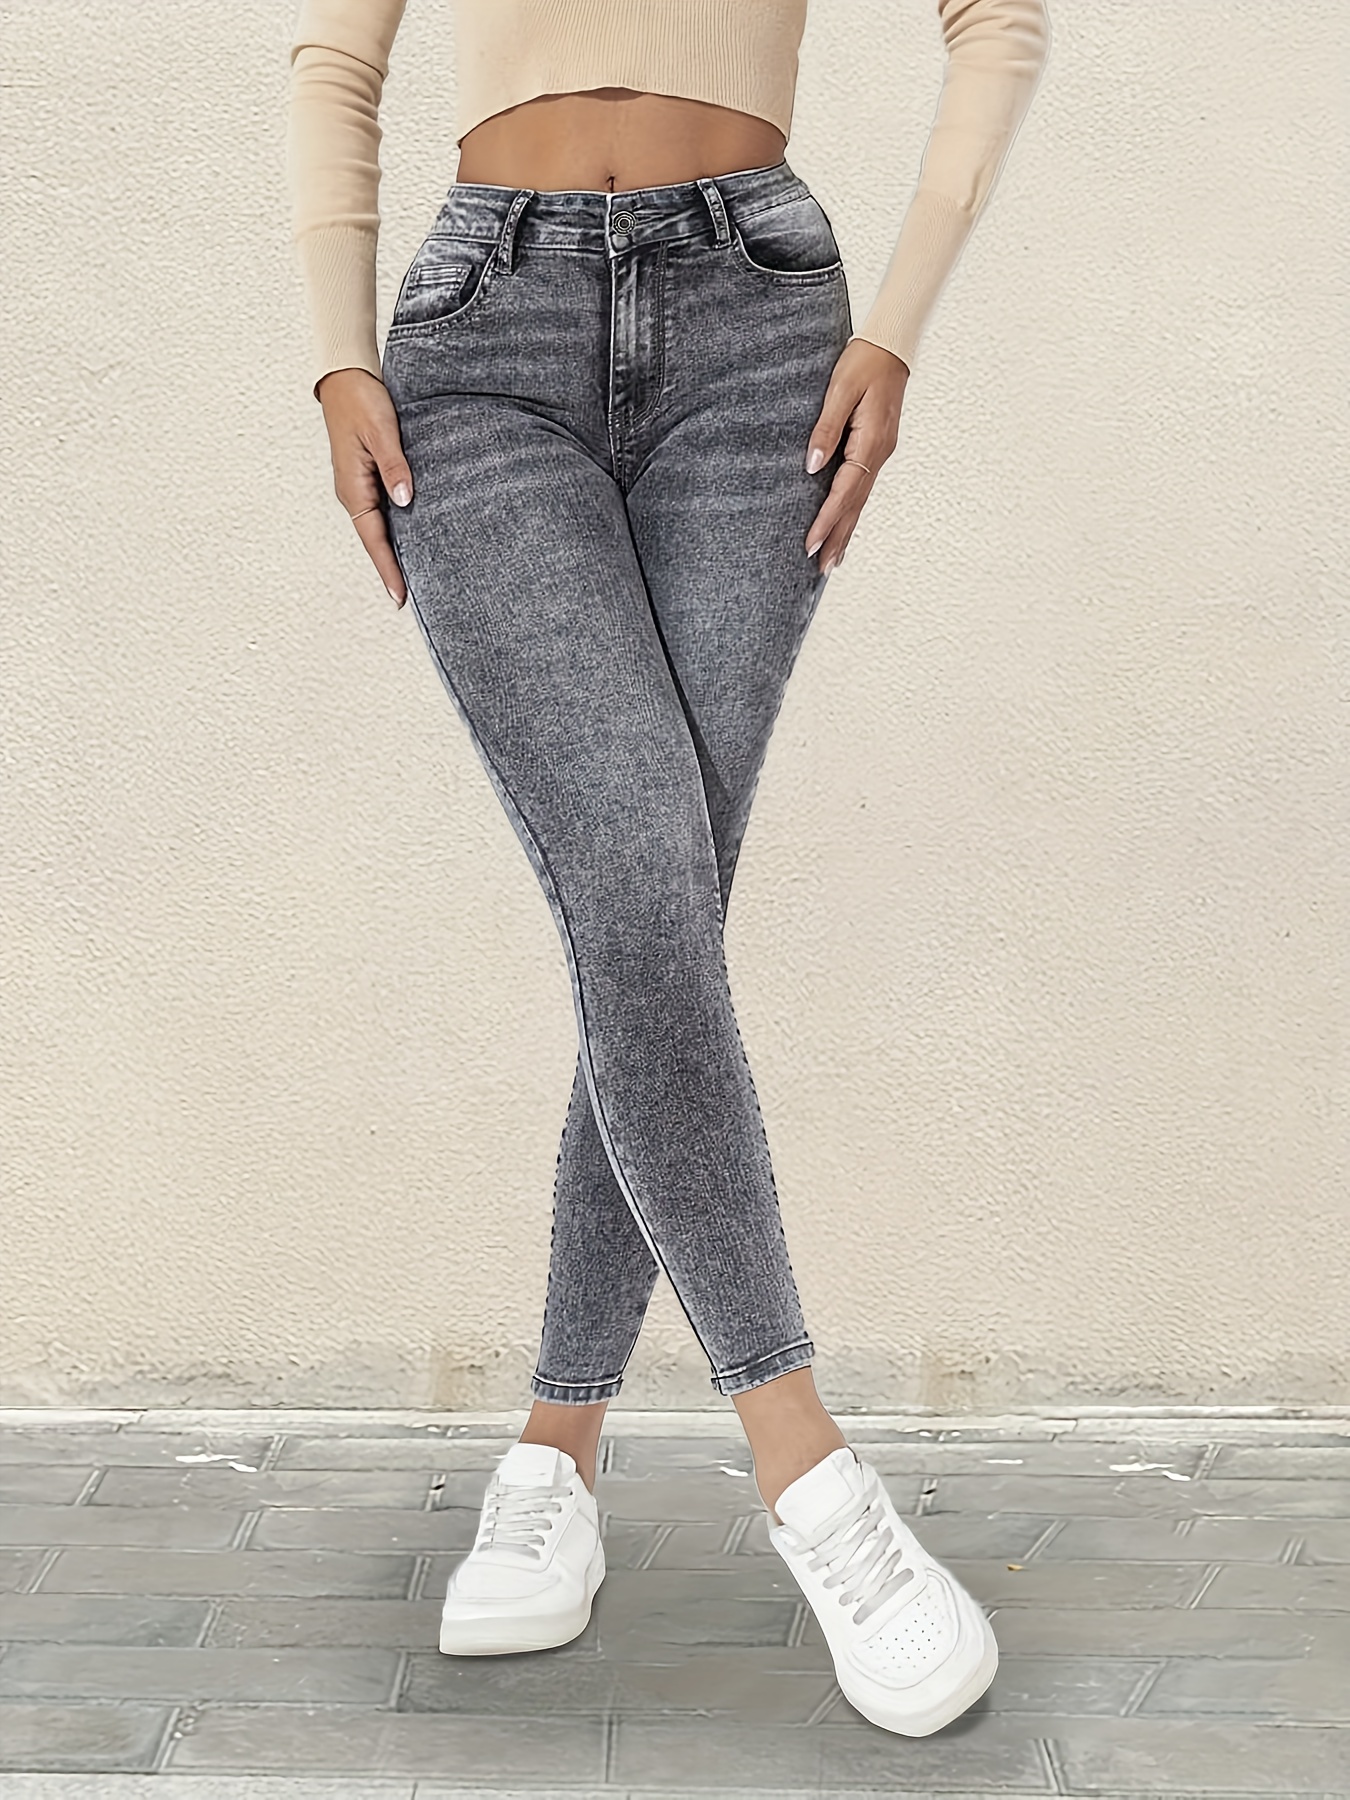 Jeans Gris Mujer Chupin